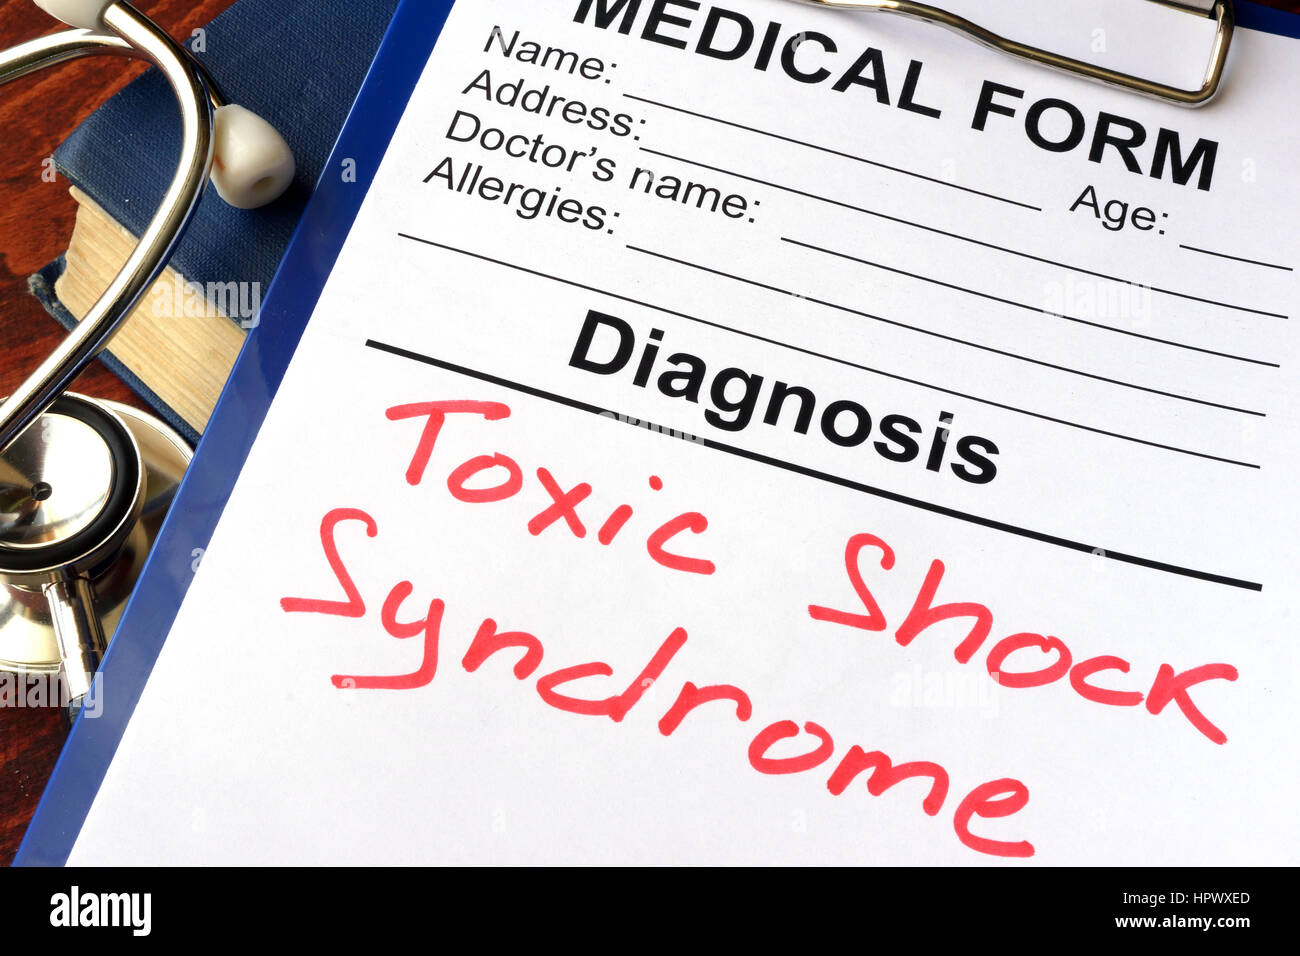 Medical form with diagnosis Toxic shock syndrome. Stock Photo